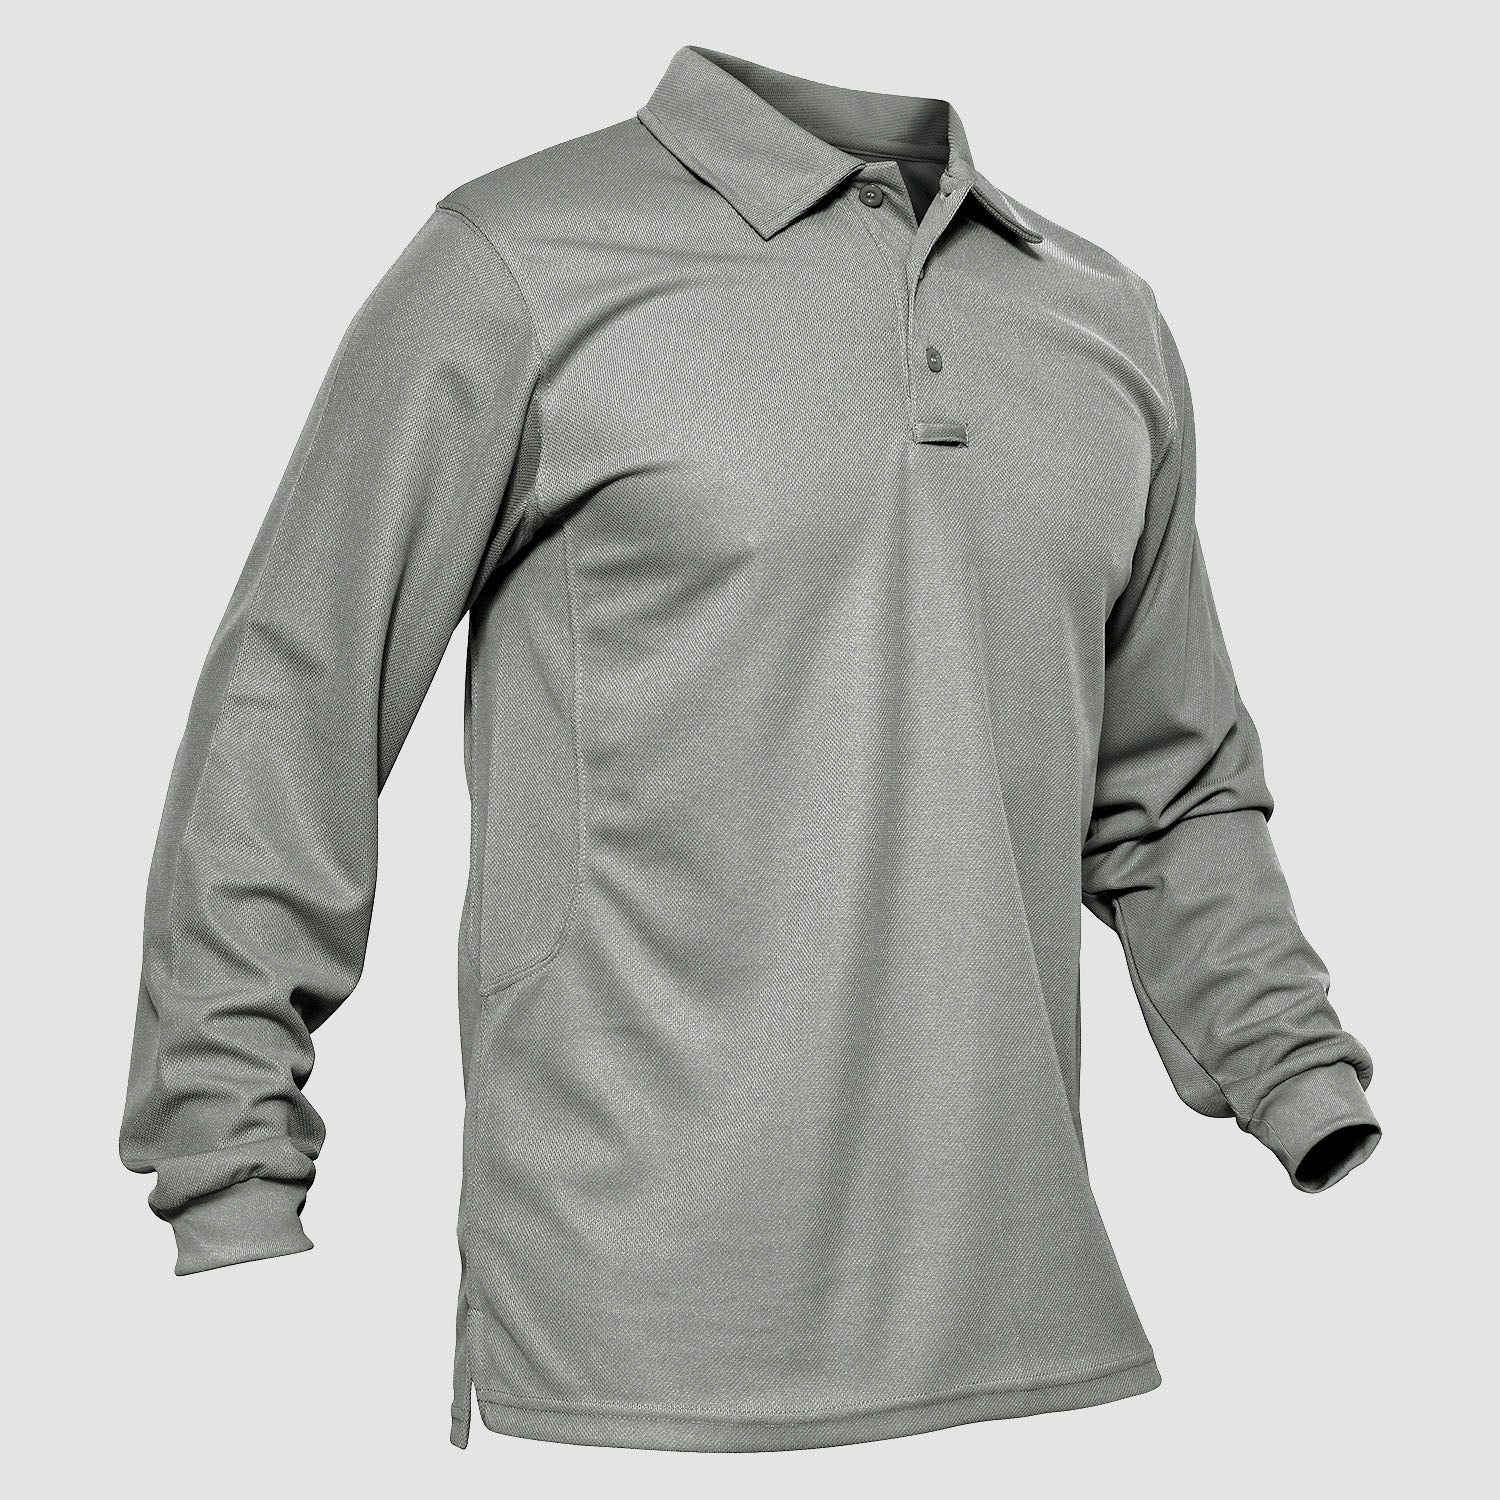 JIM LEAGUE Men's Dry Fit Polo Shirts - Long Sleeve Golf Tennis Fishing  Performance Collar Shirt Athletic Casual Tactical UPF, Grey, XX-Large :  : Clothing, Shoes & Accessories